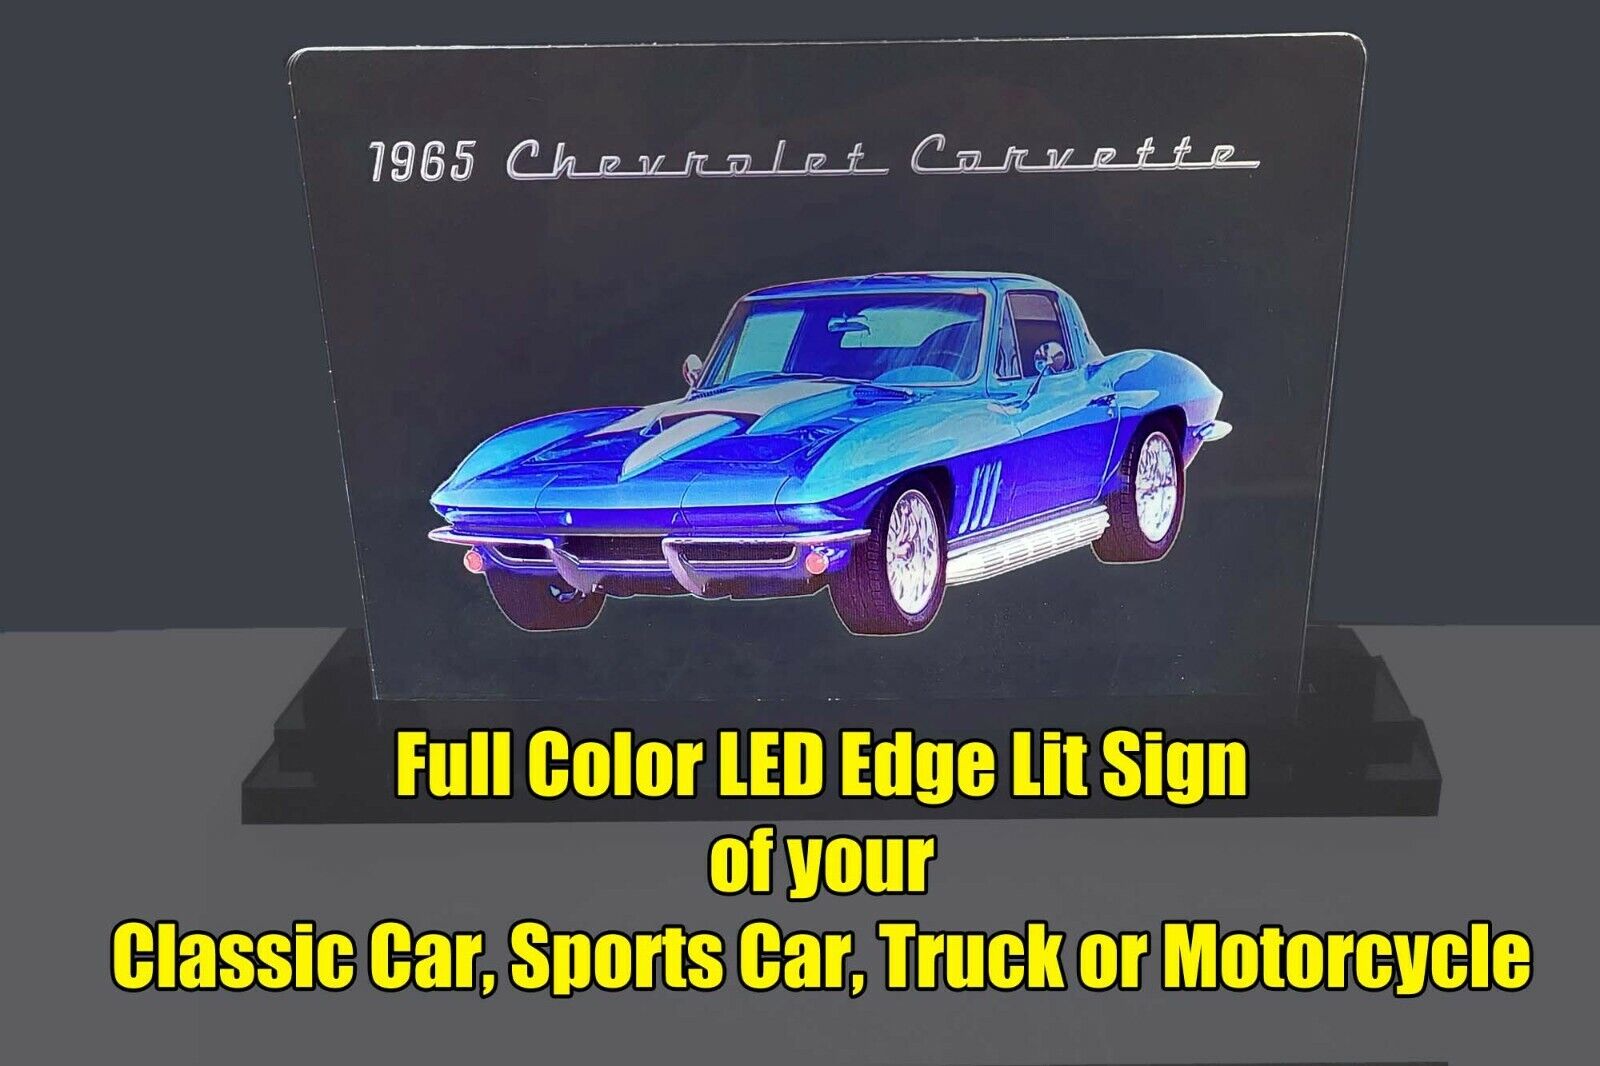 Your Classic Vehicle in Full Color on an LED Edge Lit Sign  